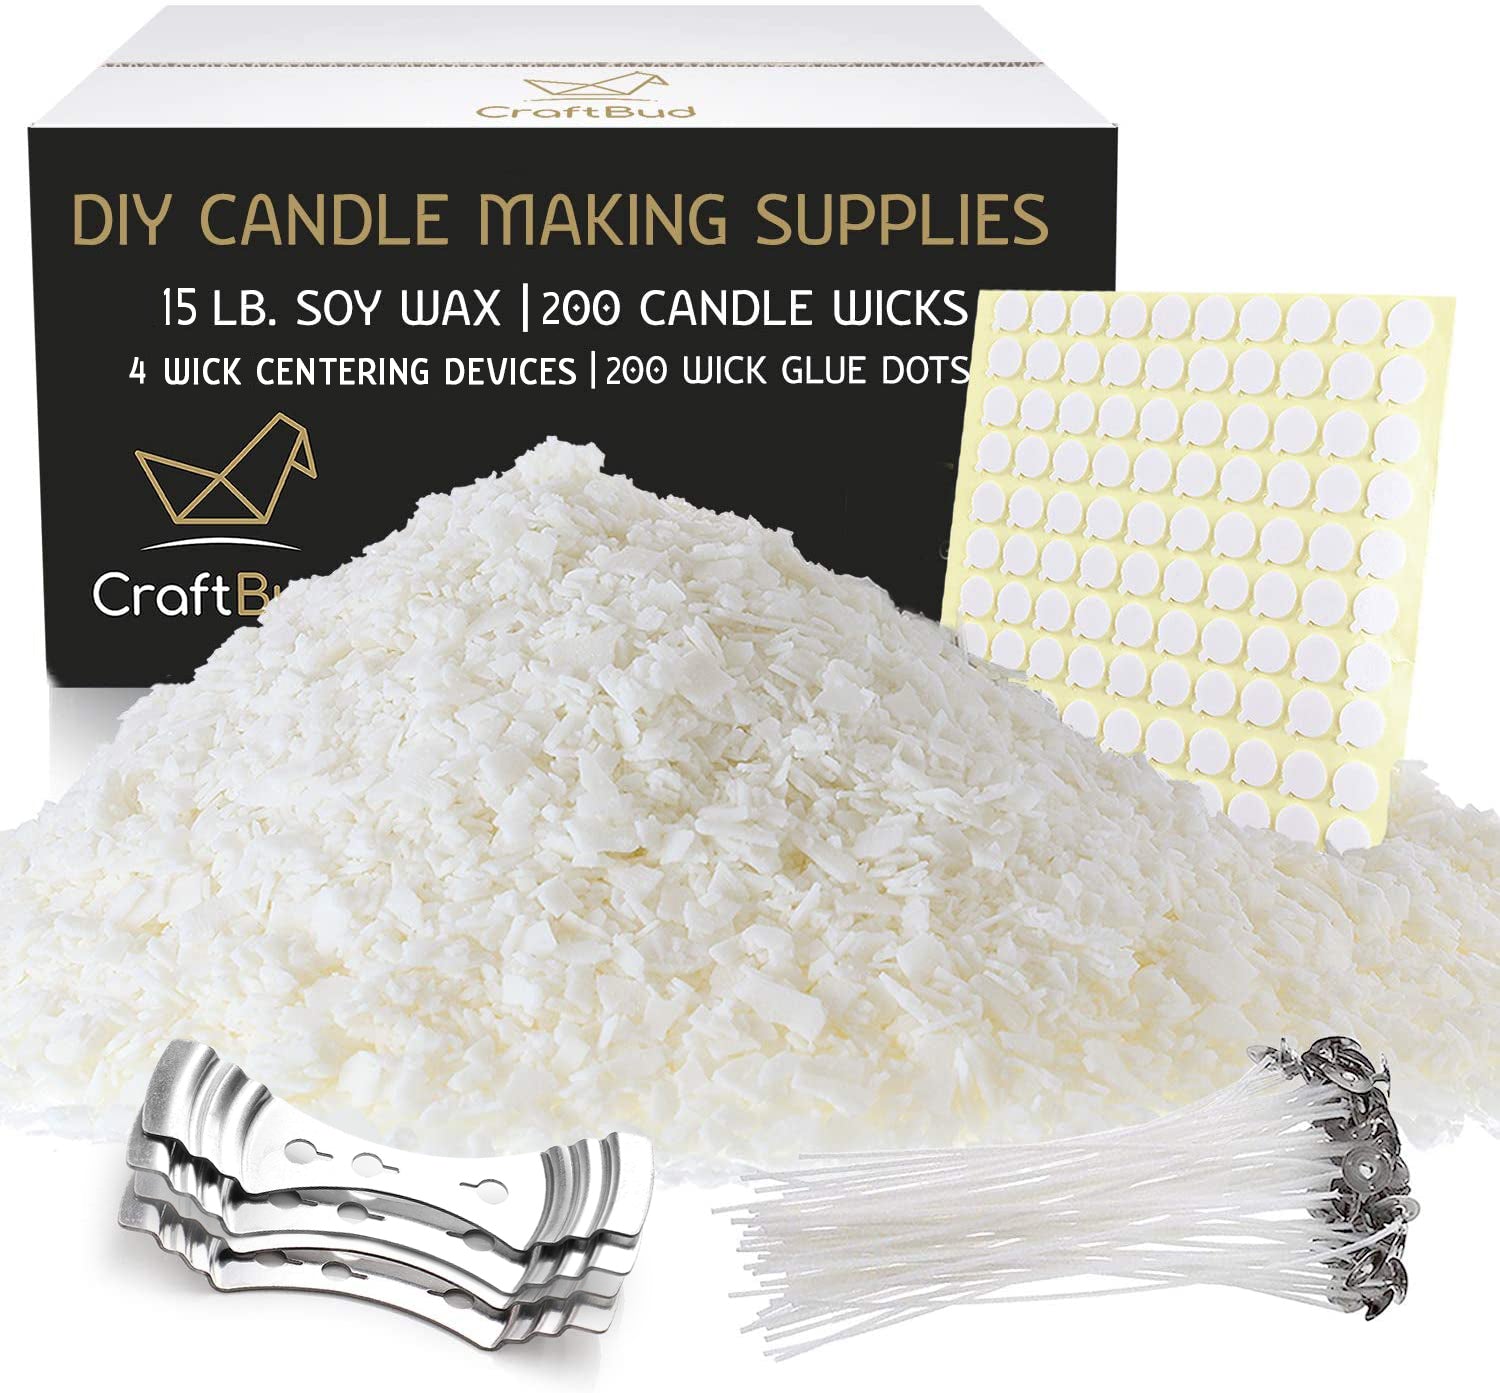 Complete Candle Making Kit for Adults Kids,Candle Making Supplies